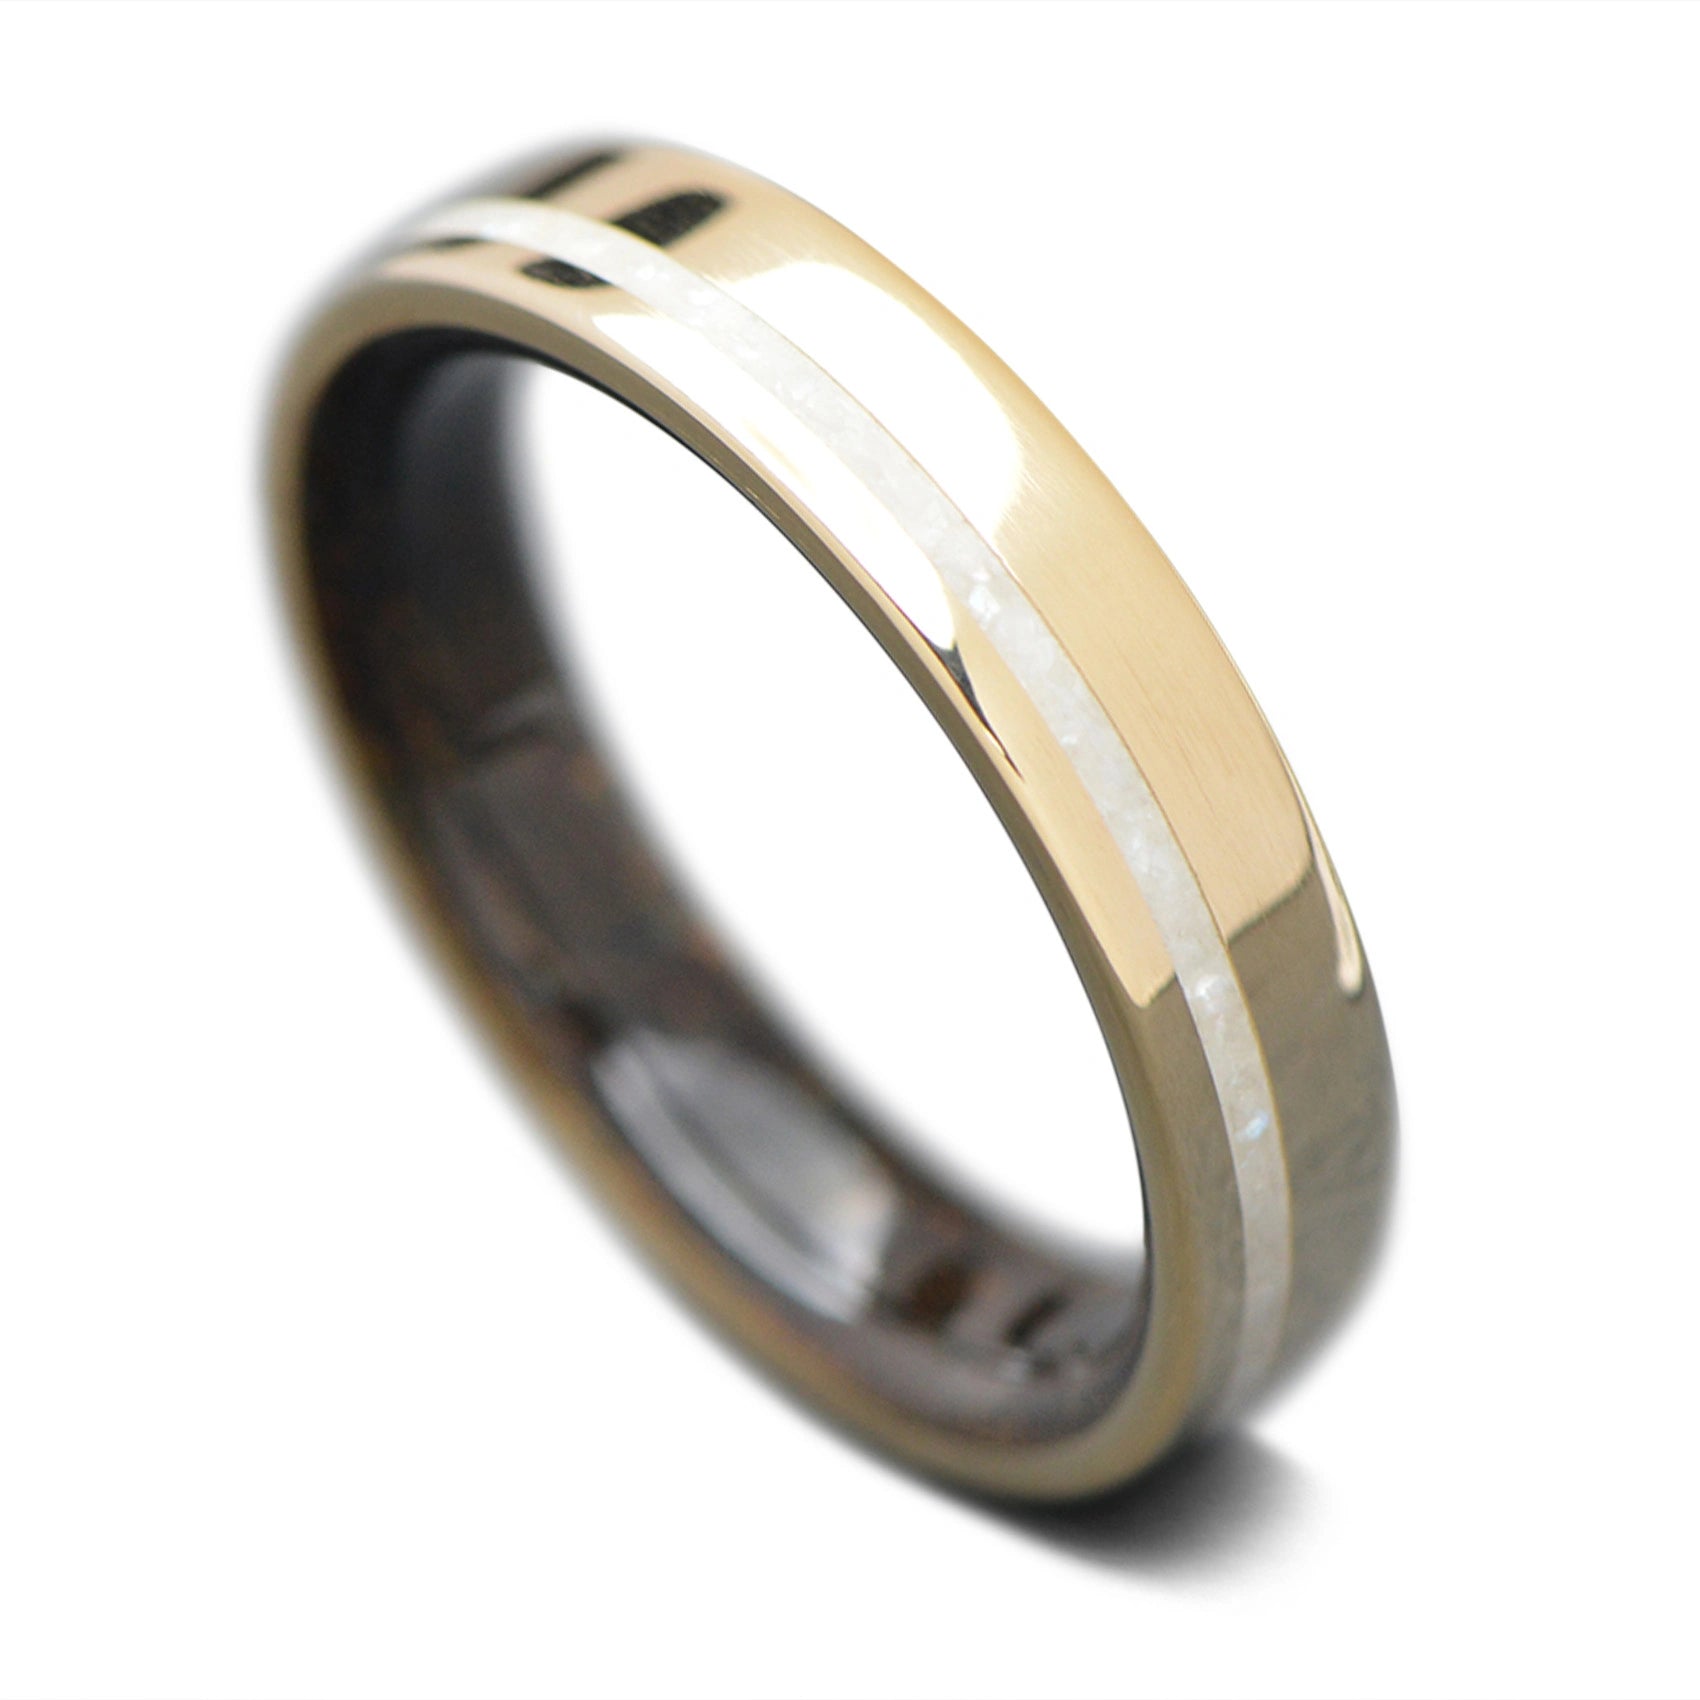 Yellow Gold core ring with Pearl inlay and T-Rex inner sleeve, 5mm -THE COMMITMENT